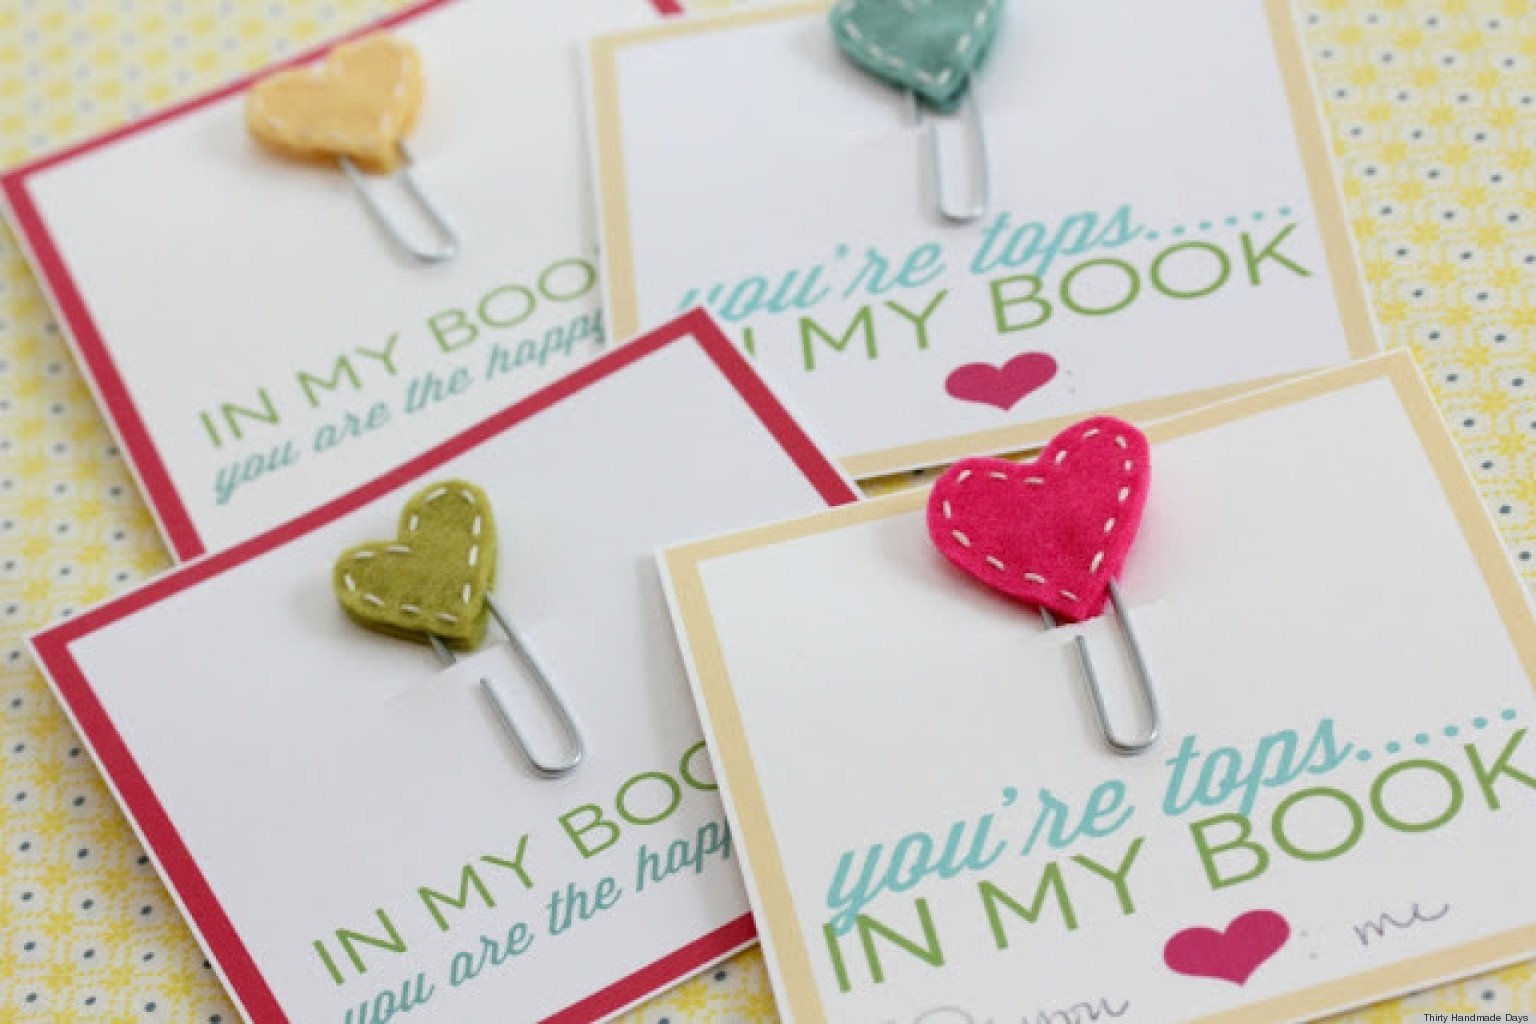 10 Fashionable Valentine Day Card Ideas Homemade valentines day ideas adorable diy cards and gifts huffpost 2022